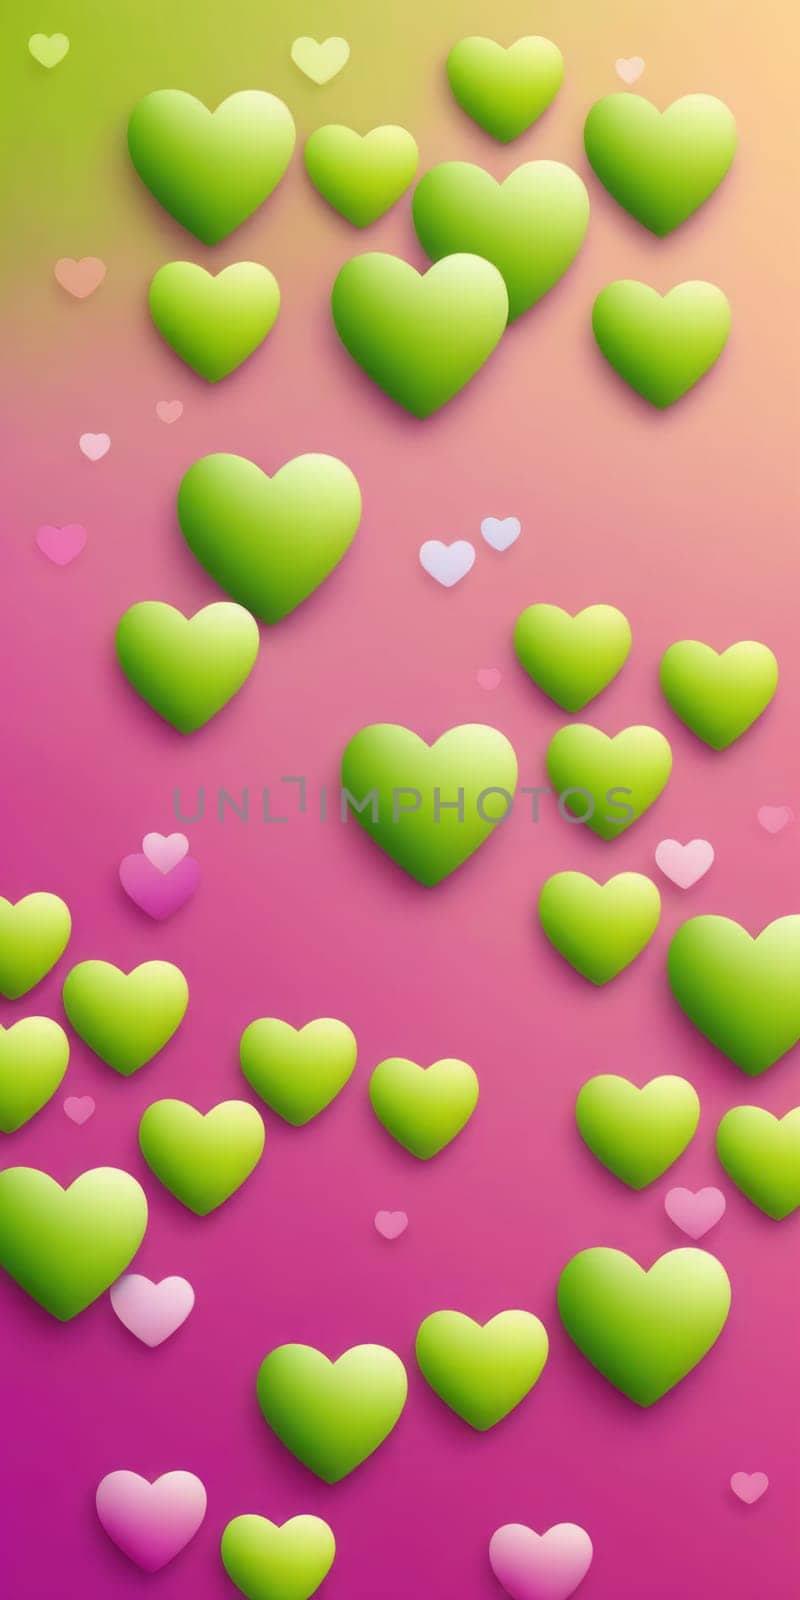 Heart Shapes in Lime and Orchid by nkotlyar